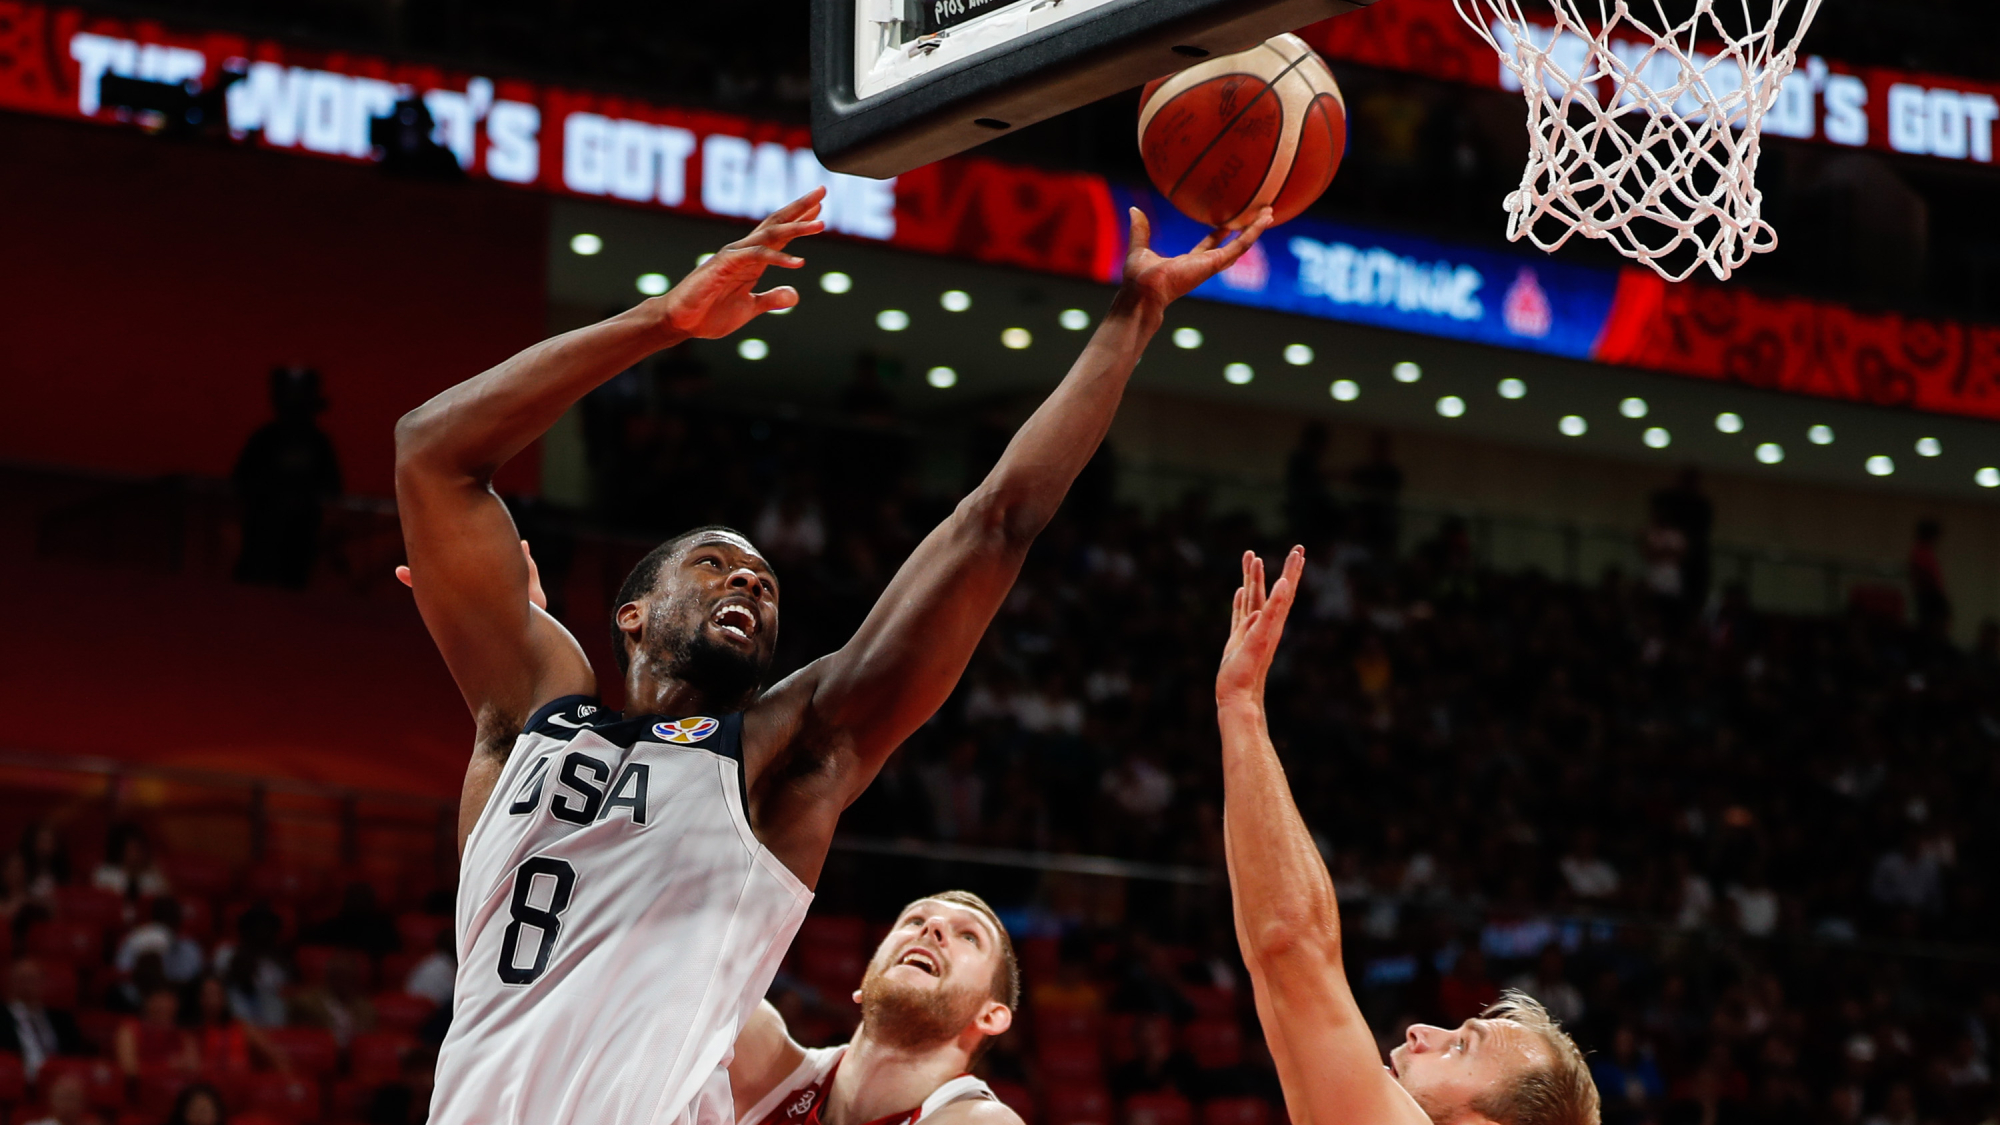 How to watch the FIBA Basketball World Cup online or on TV What to Watch